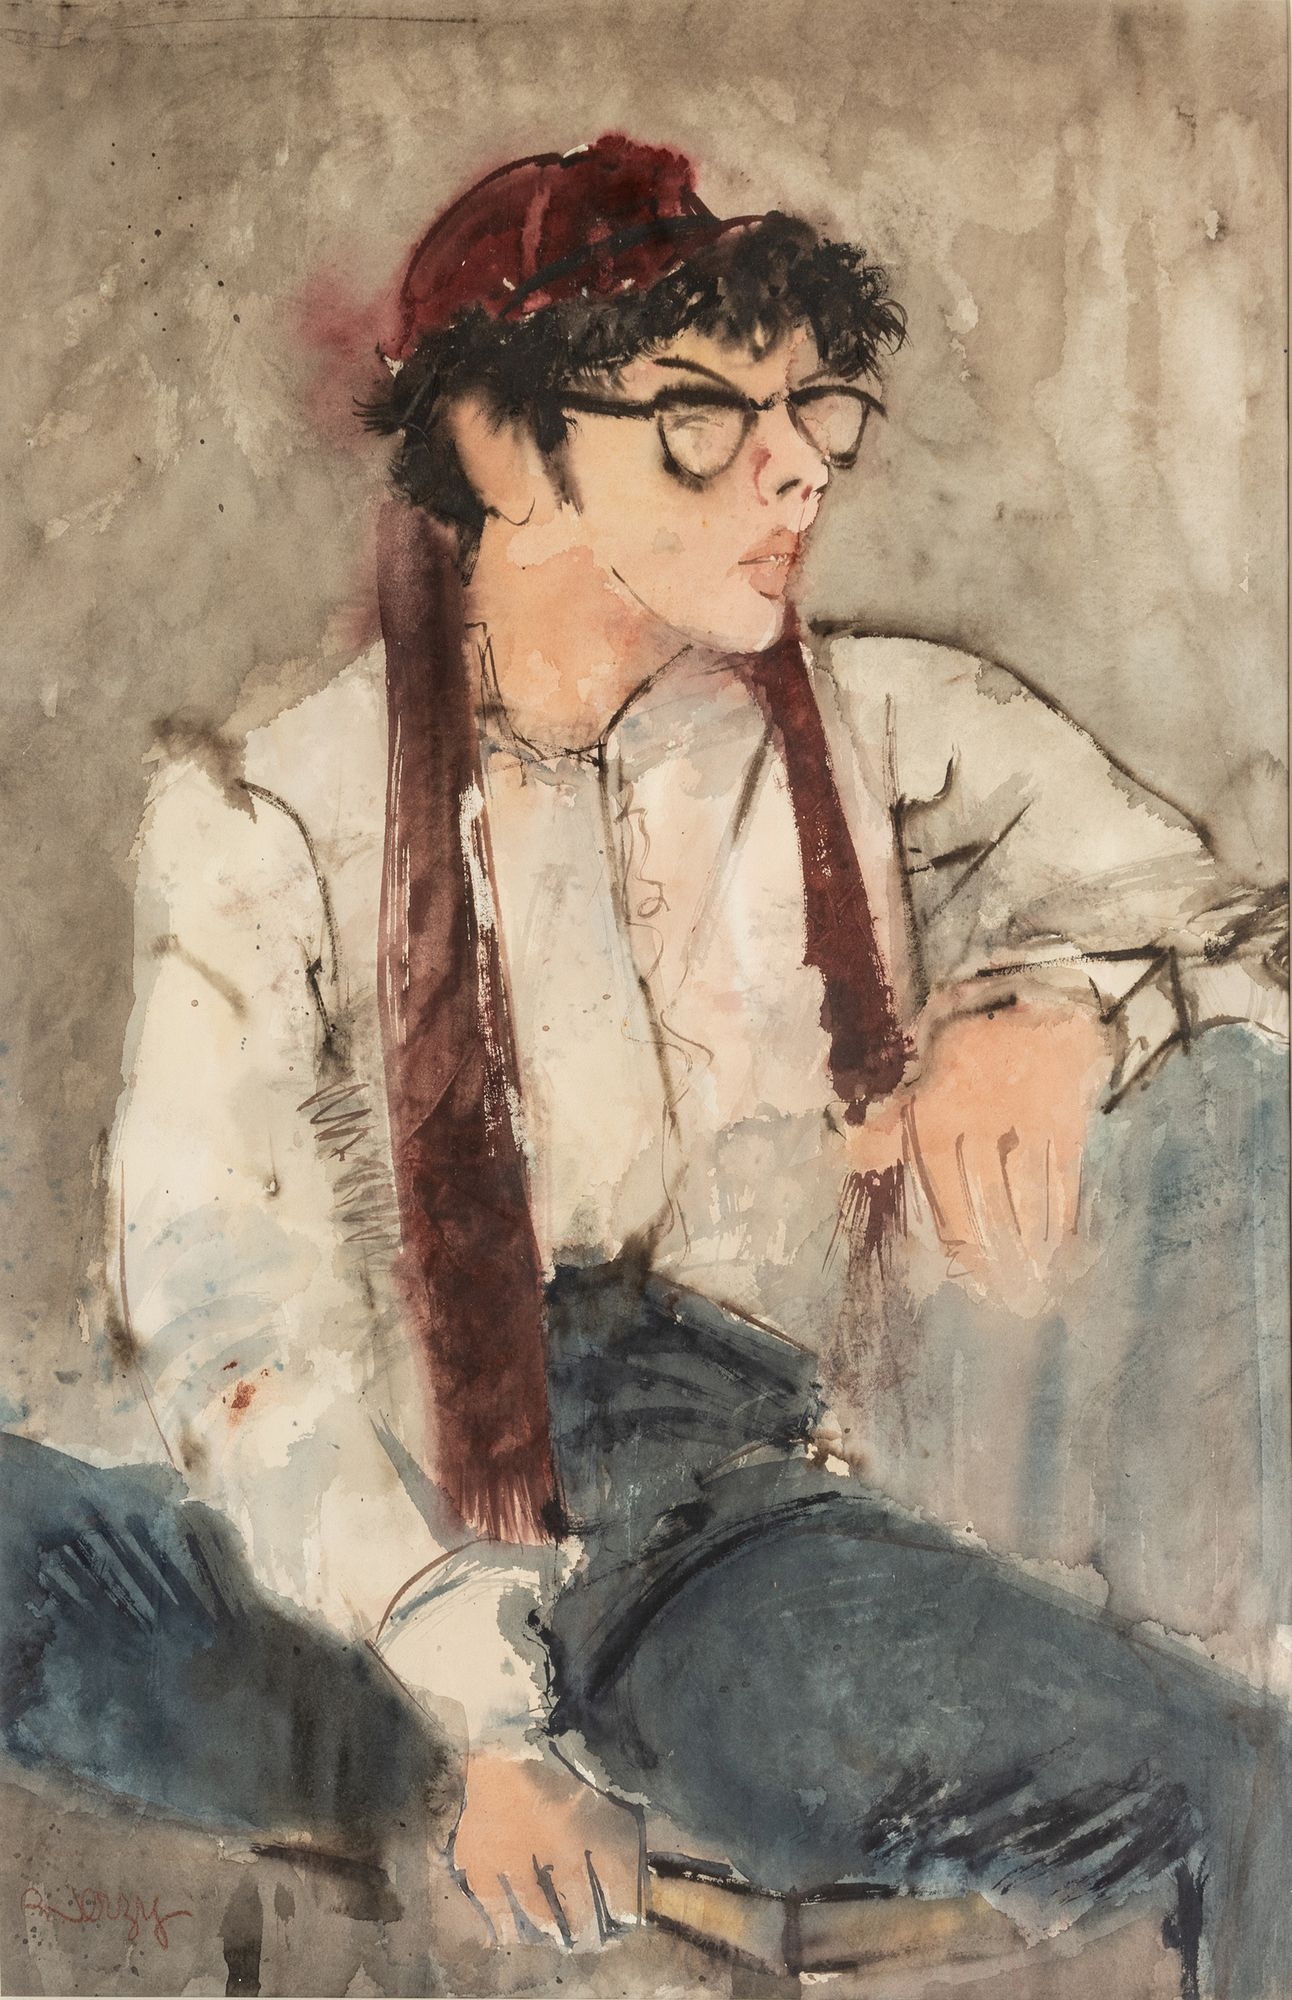 Young Man with Glasses by Richard Jerzy